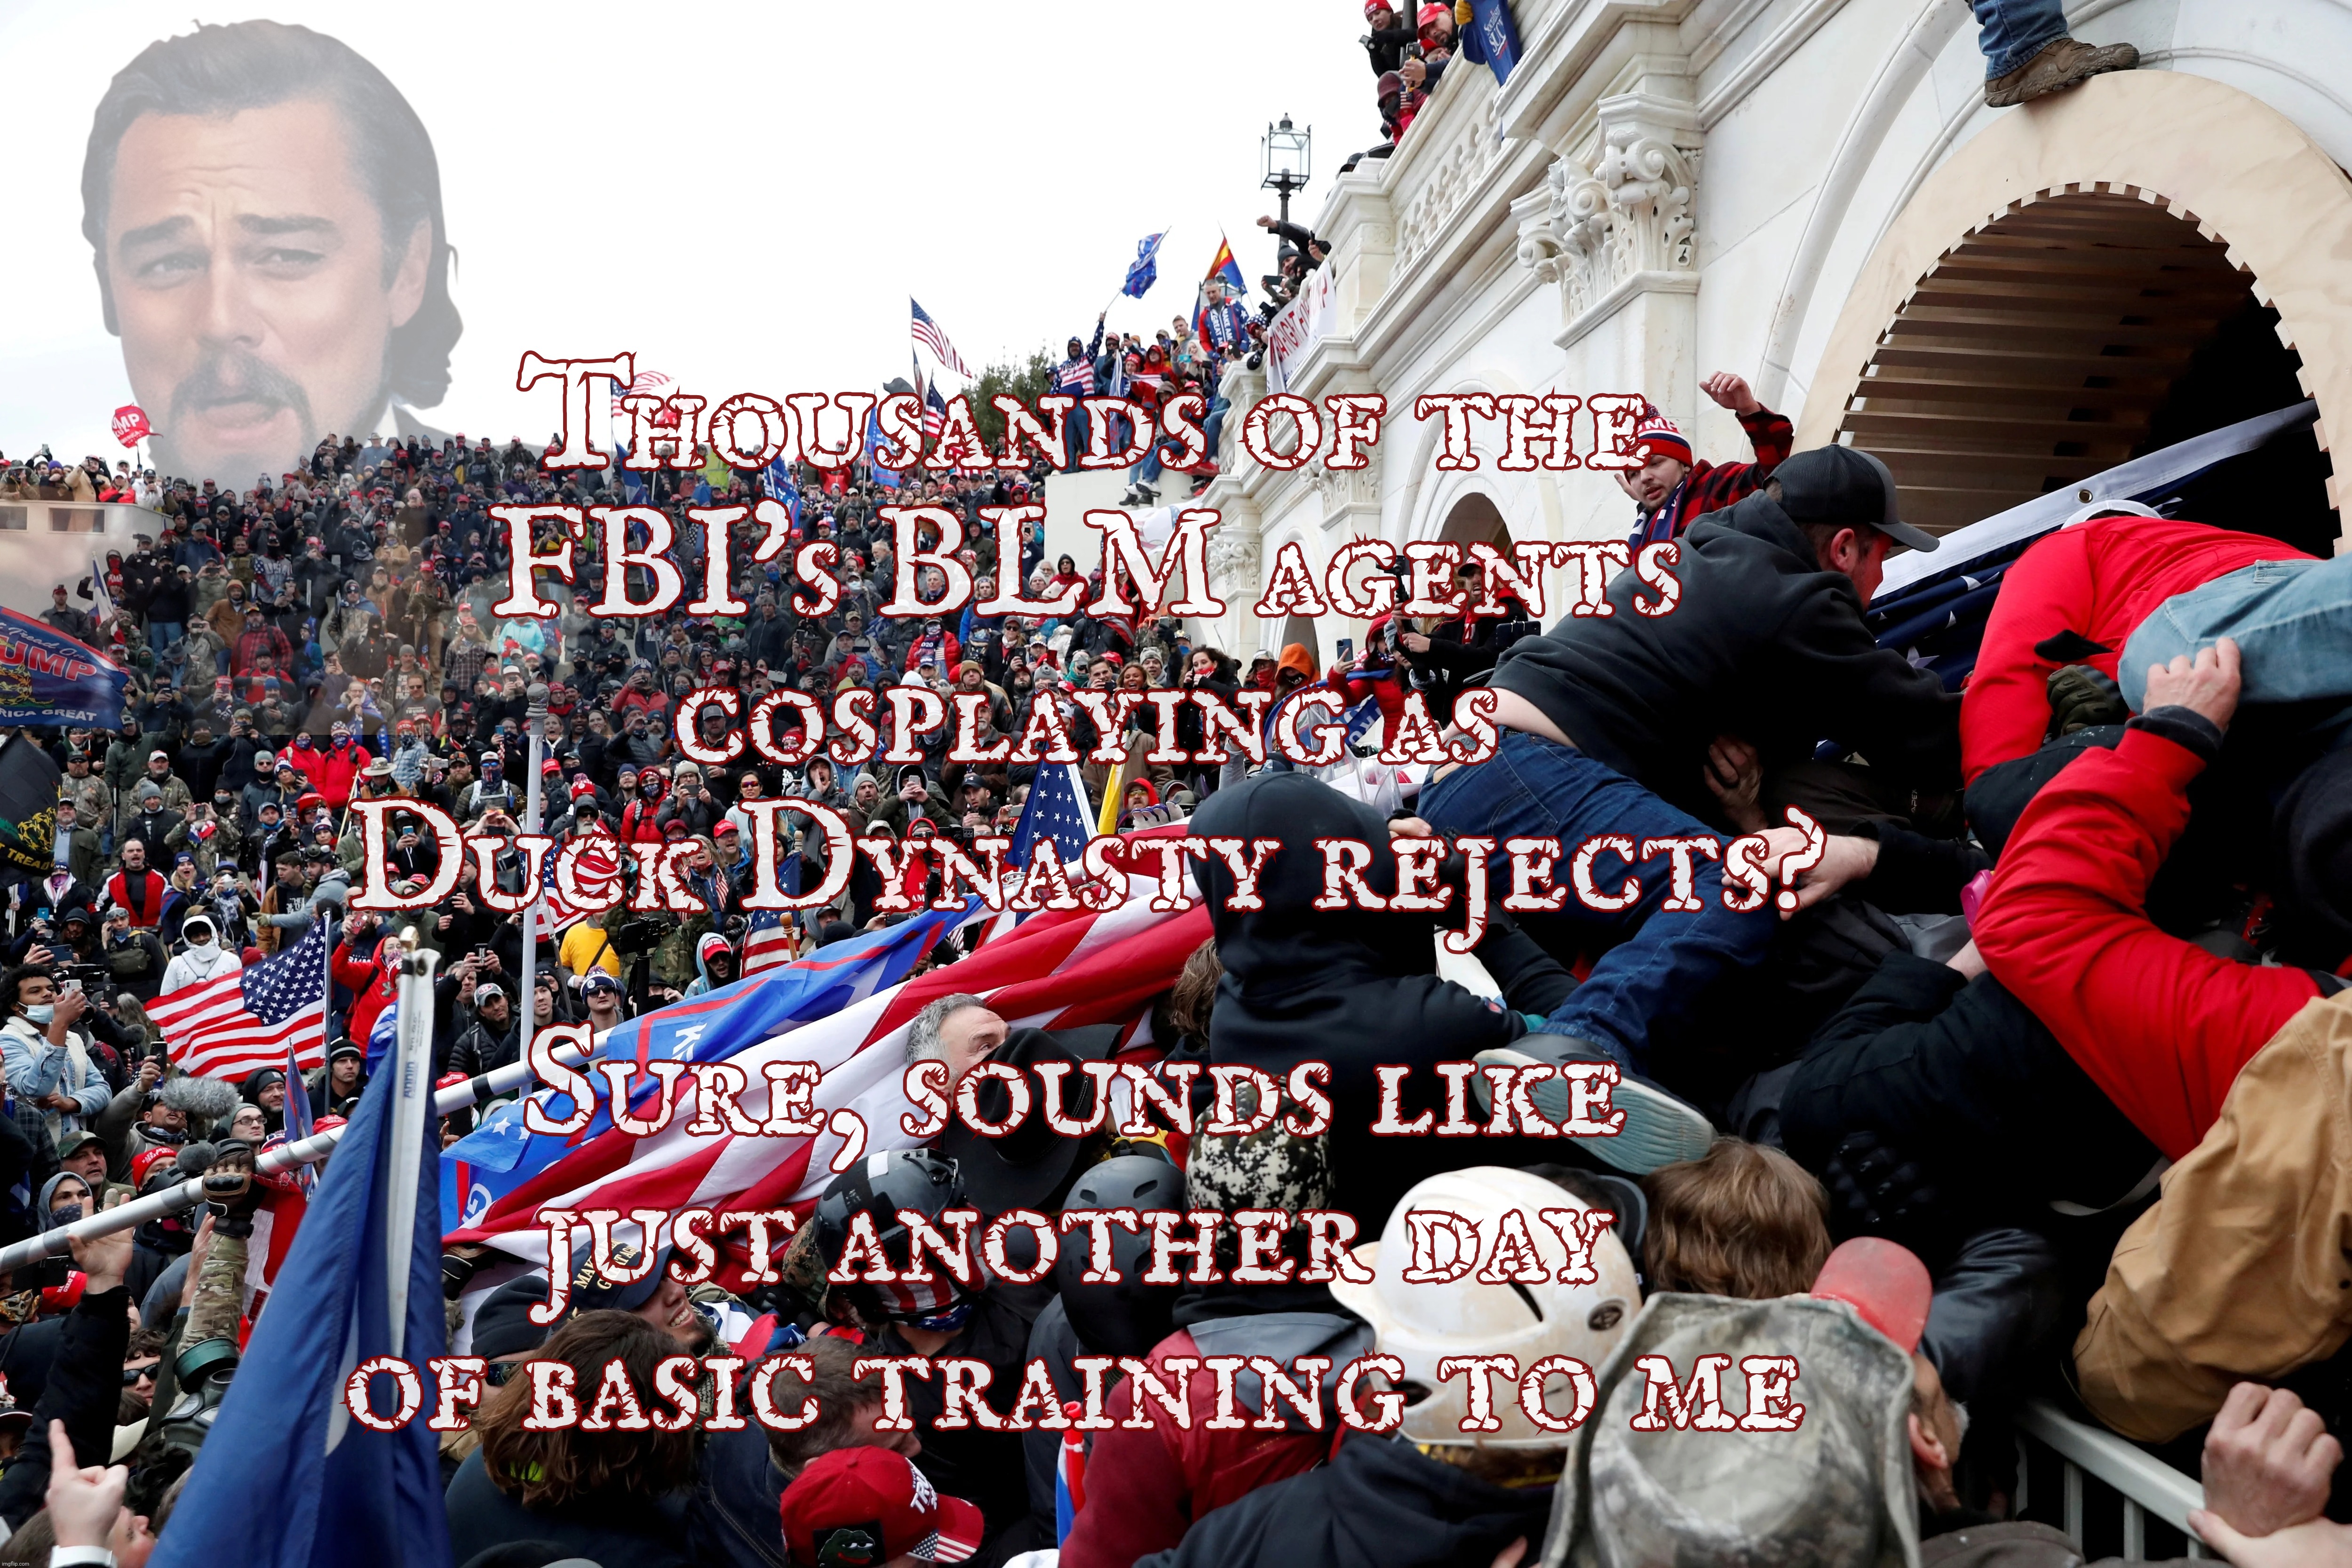 Thousands of the
FBI's BLM agents cosplaying as Duck Dynasty rejects? Sure, sounds like just another day
of basic training to me | made w/ Imgflip meme maker